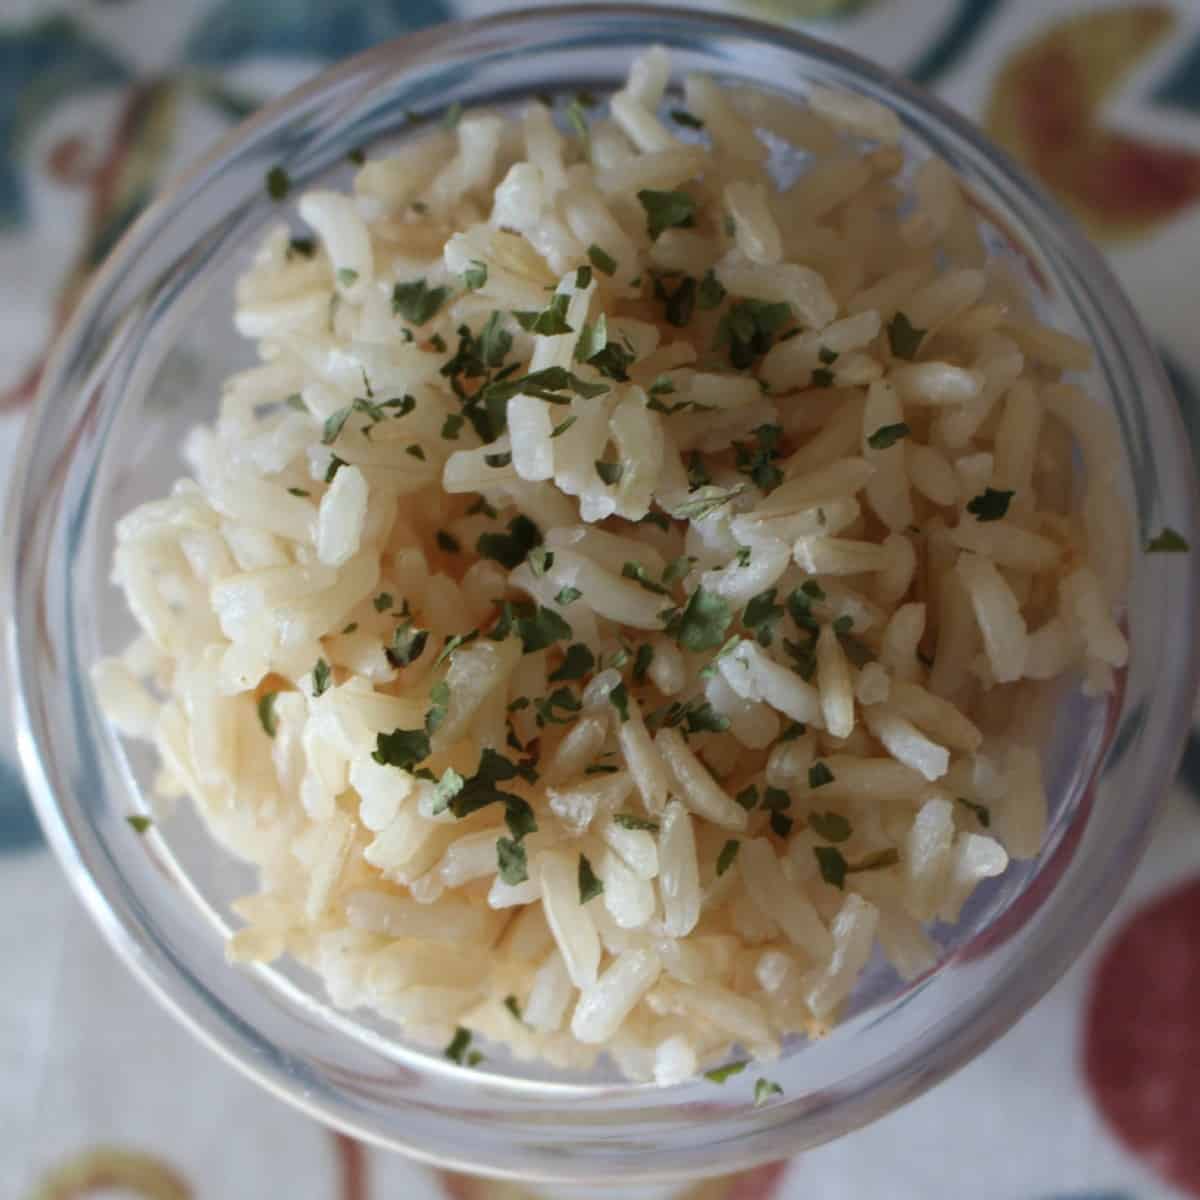 Vibrant green cilantro and a hint of lime zest transform this fluffy rice into a fiesta chipotle cilantro rice copycat